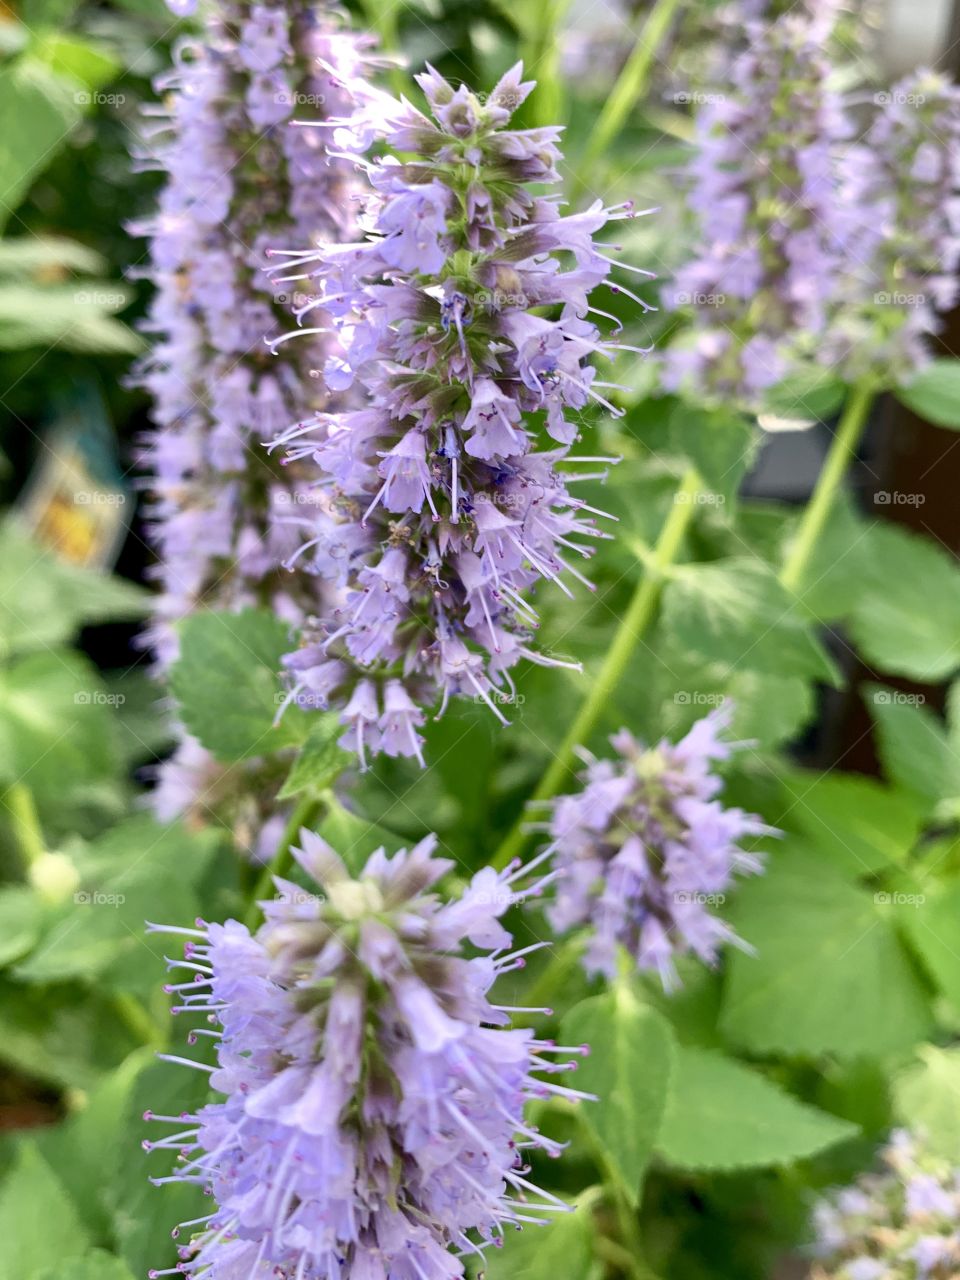  Blue Hill Salvia plant in bloom